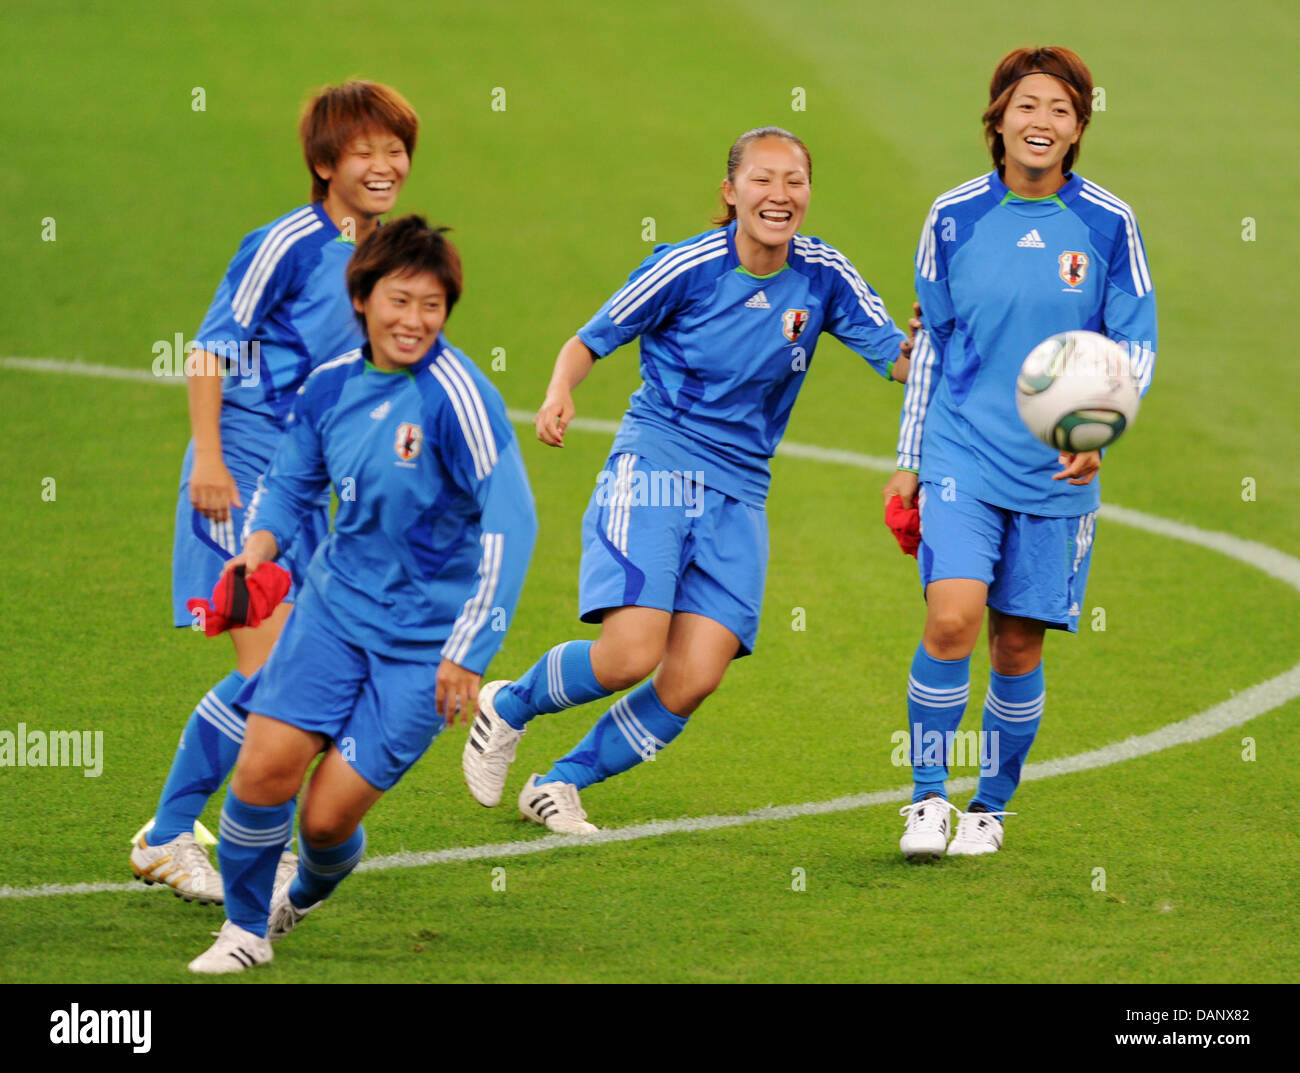 Asuna Tanaka (l-r), Megumi Takase, Karina Maruyama and Kozue Ando of Japan during a training session of the team in Frankfurt, Germany 12 July 2011. Japan faces Sweden in the semi-final match of the FIFA Women's World Cup in Frankfurt on 13 July 2011. Foto: Arne Dedert dpa/lhe Stock Photo